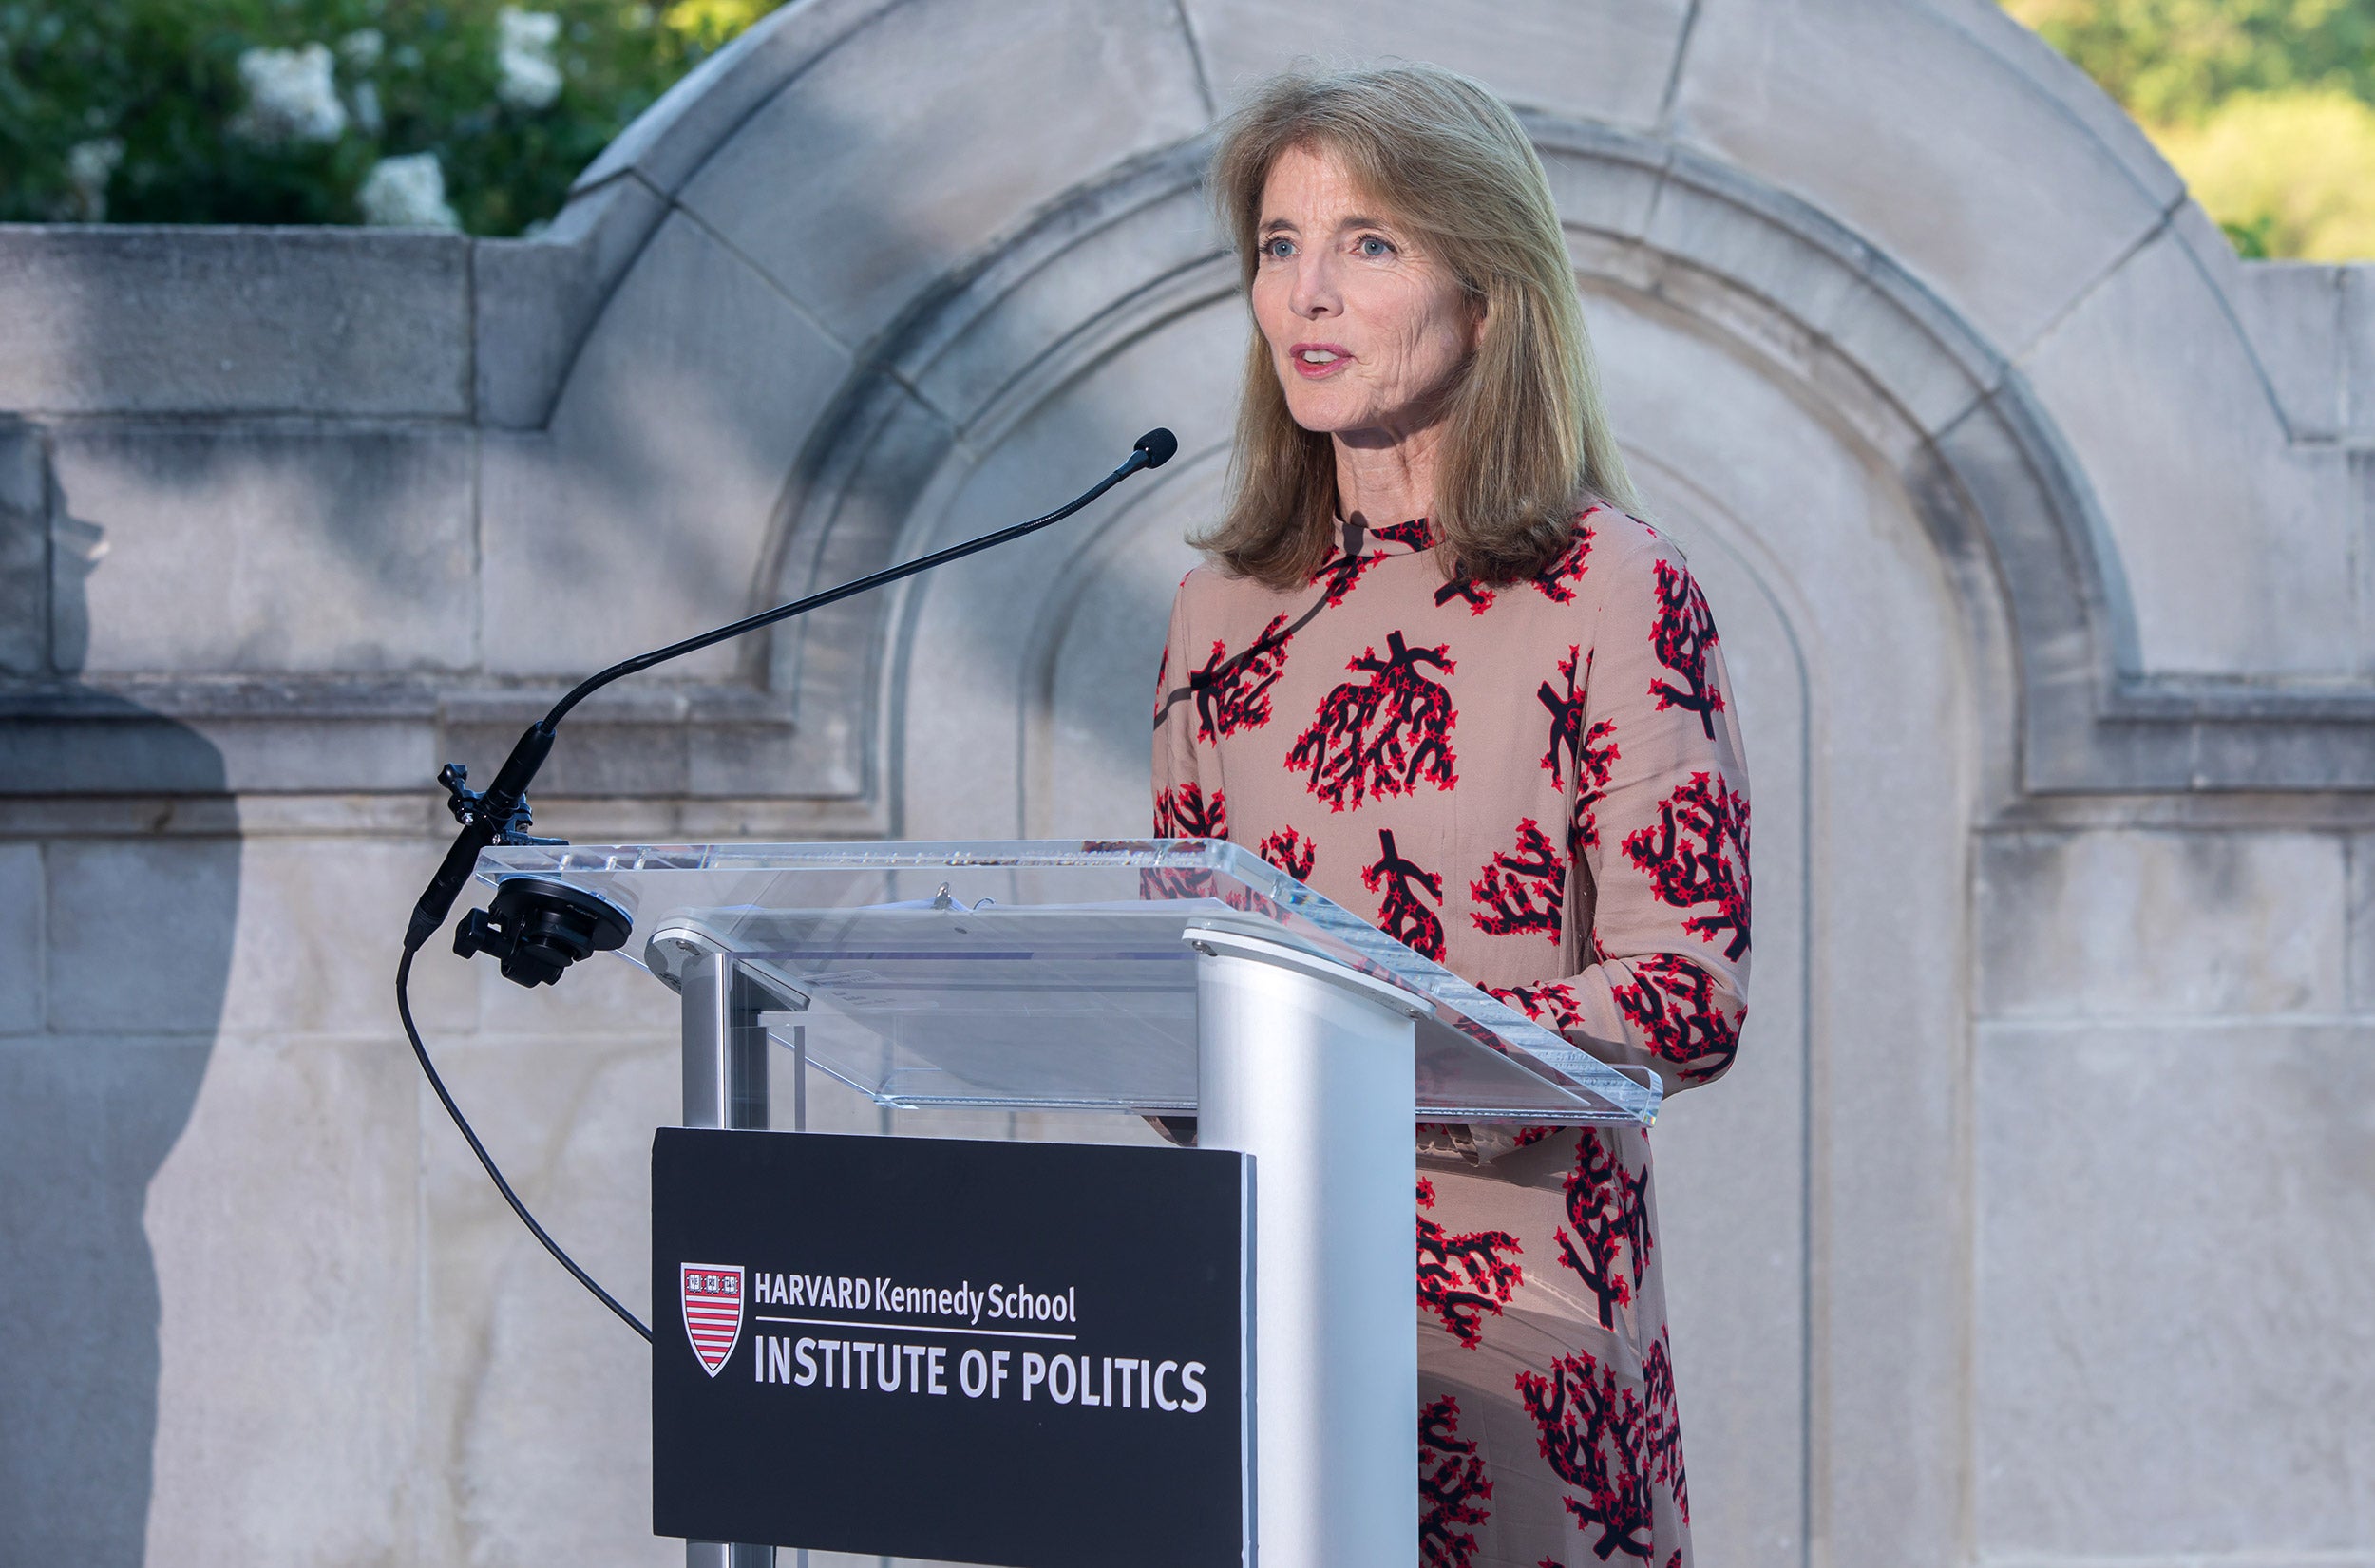 Caroline Kennedy speaking at the Harvard event in D.C.